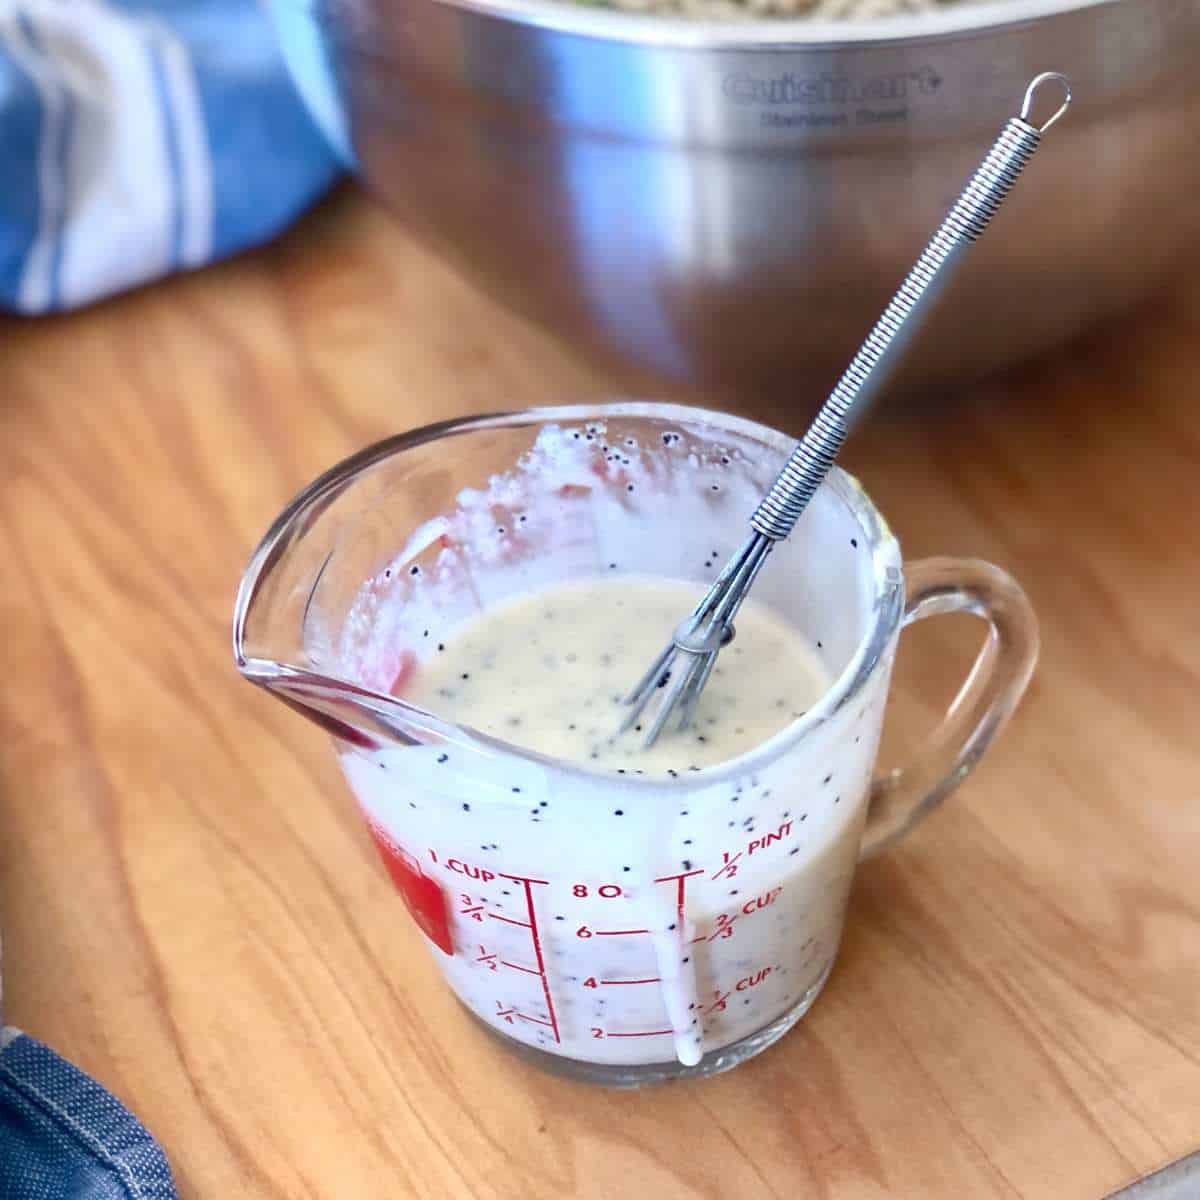 A glass measuring cup with vegan poppy seed dressing and a whisk.